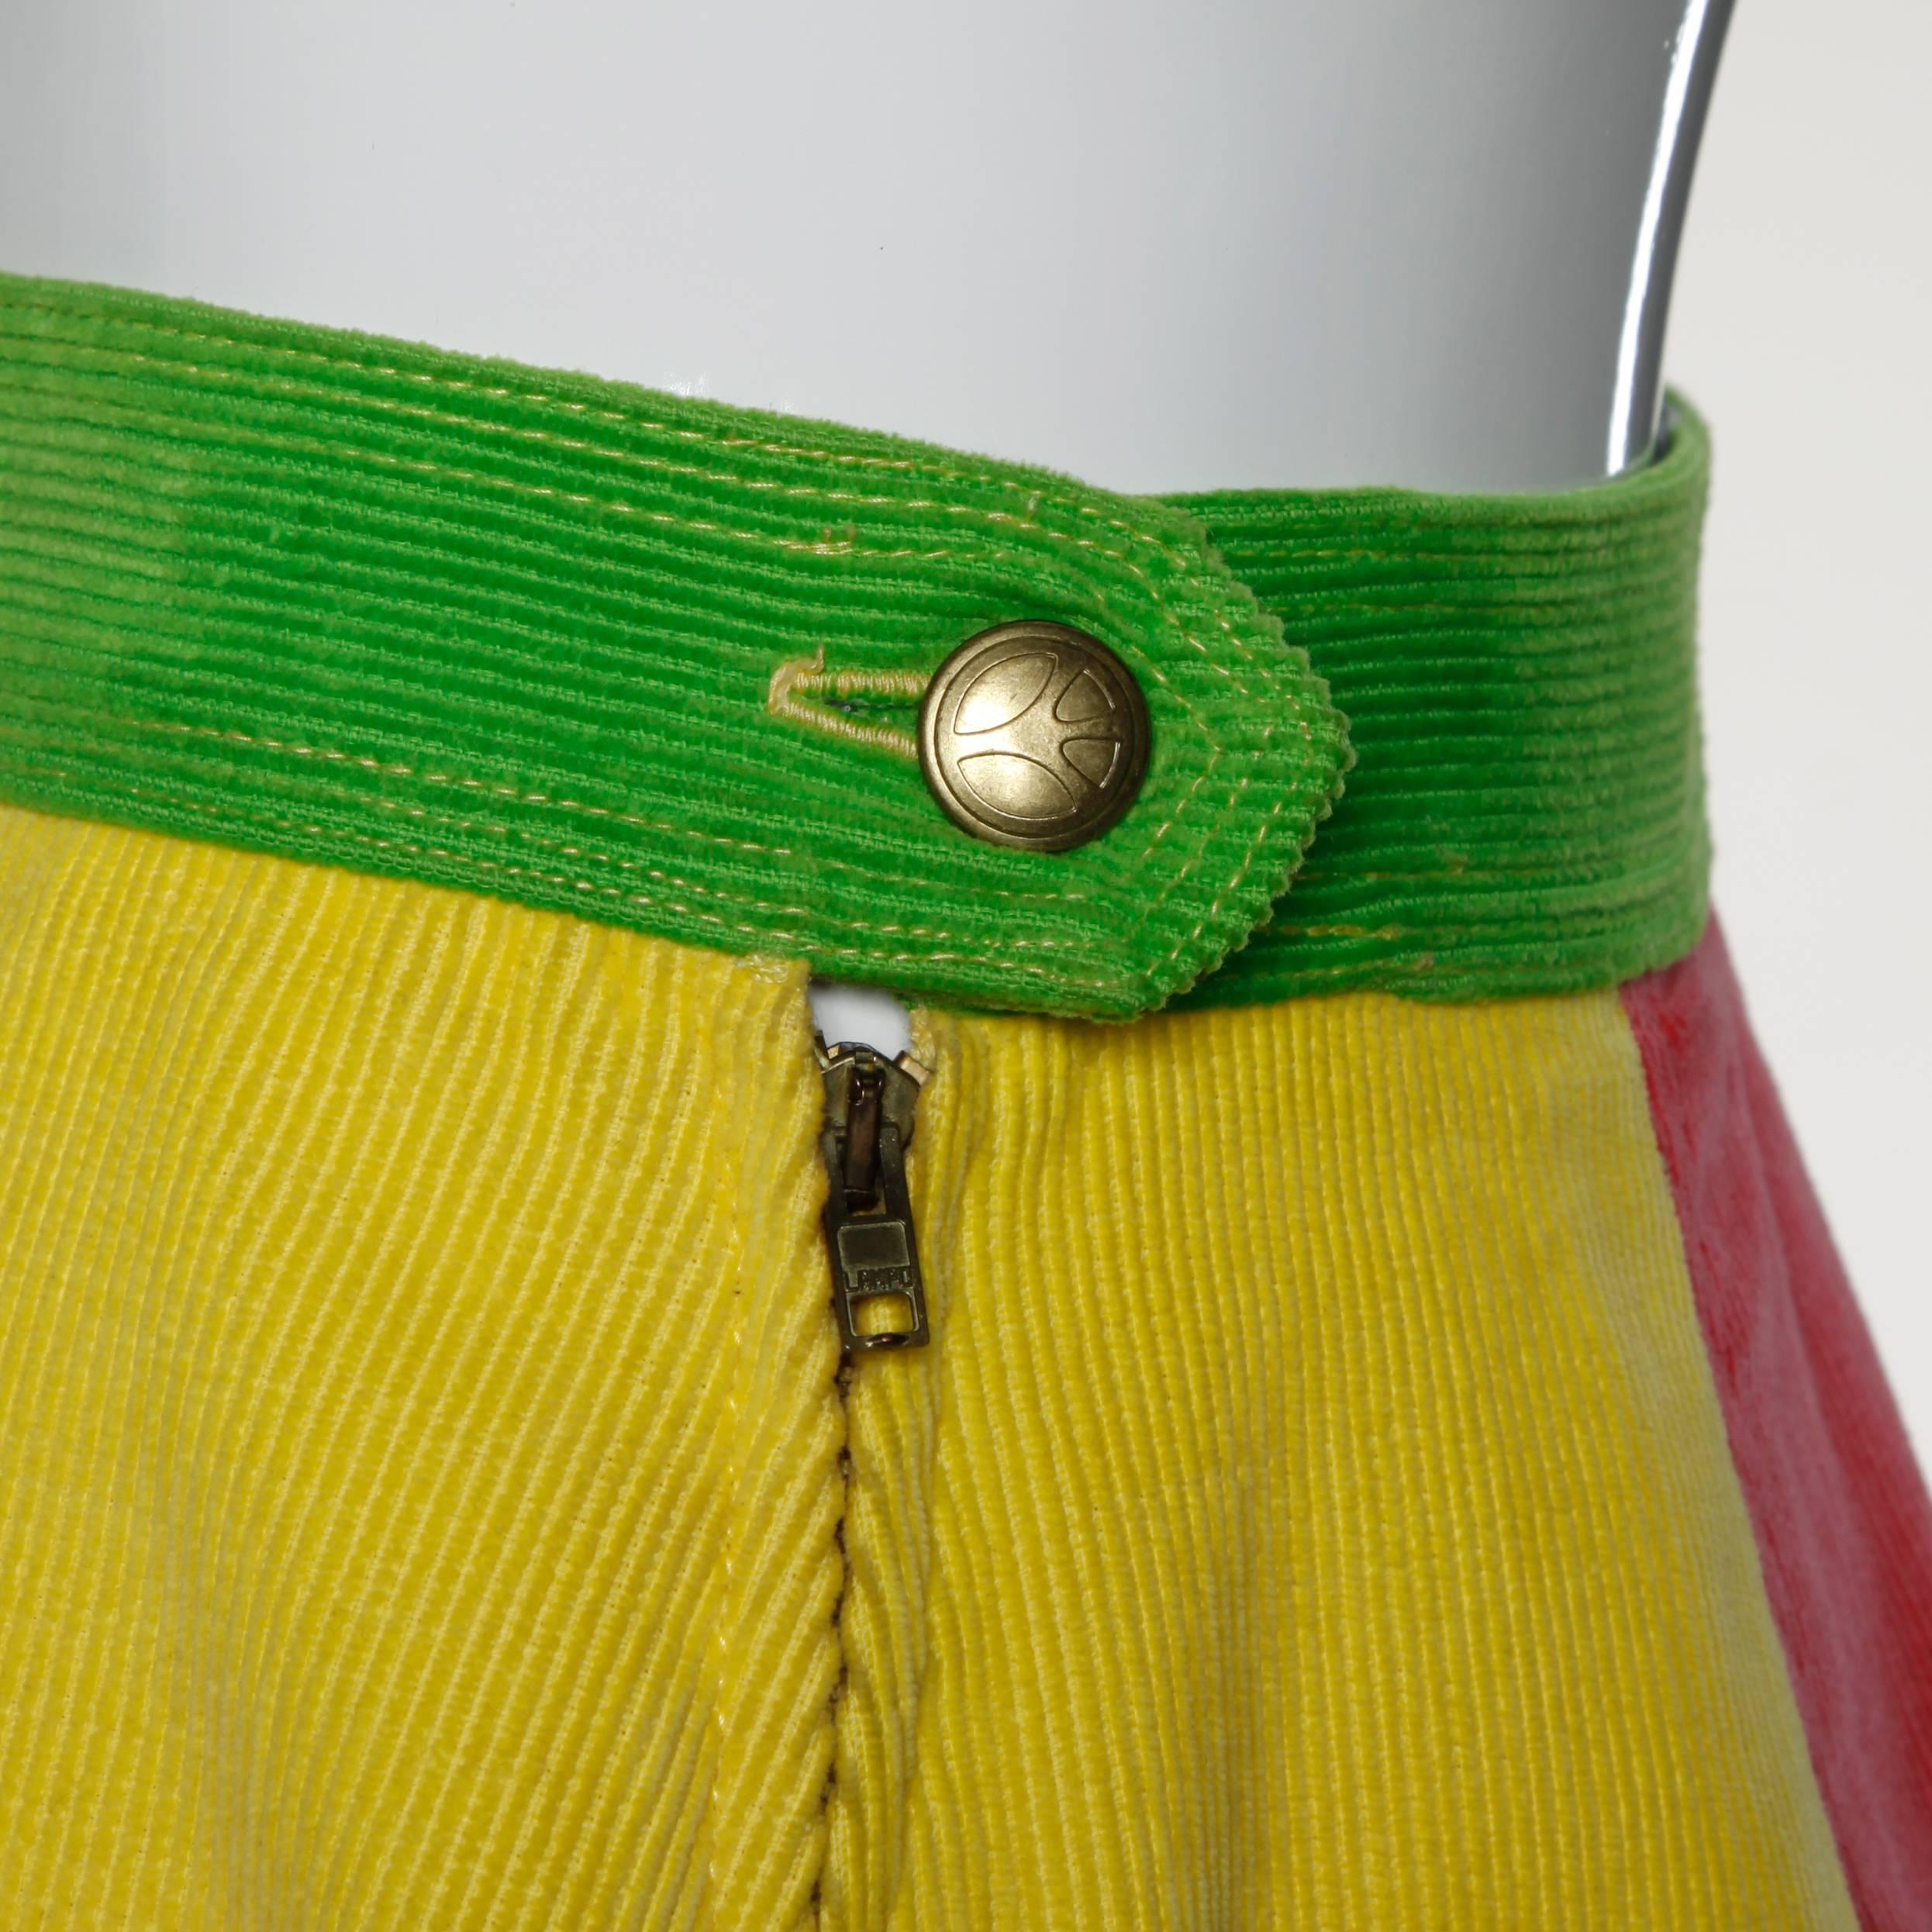 Bright color block mini skirt by Moschino Jeans in green, orange and yellow.

Details:

Fully Lined
Front Pockets
Side Metal Zip and Button Closure
Marked Size: Not Marked
Estimated Size: Small-Medium
Color: Bright Yellow/ Orange/